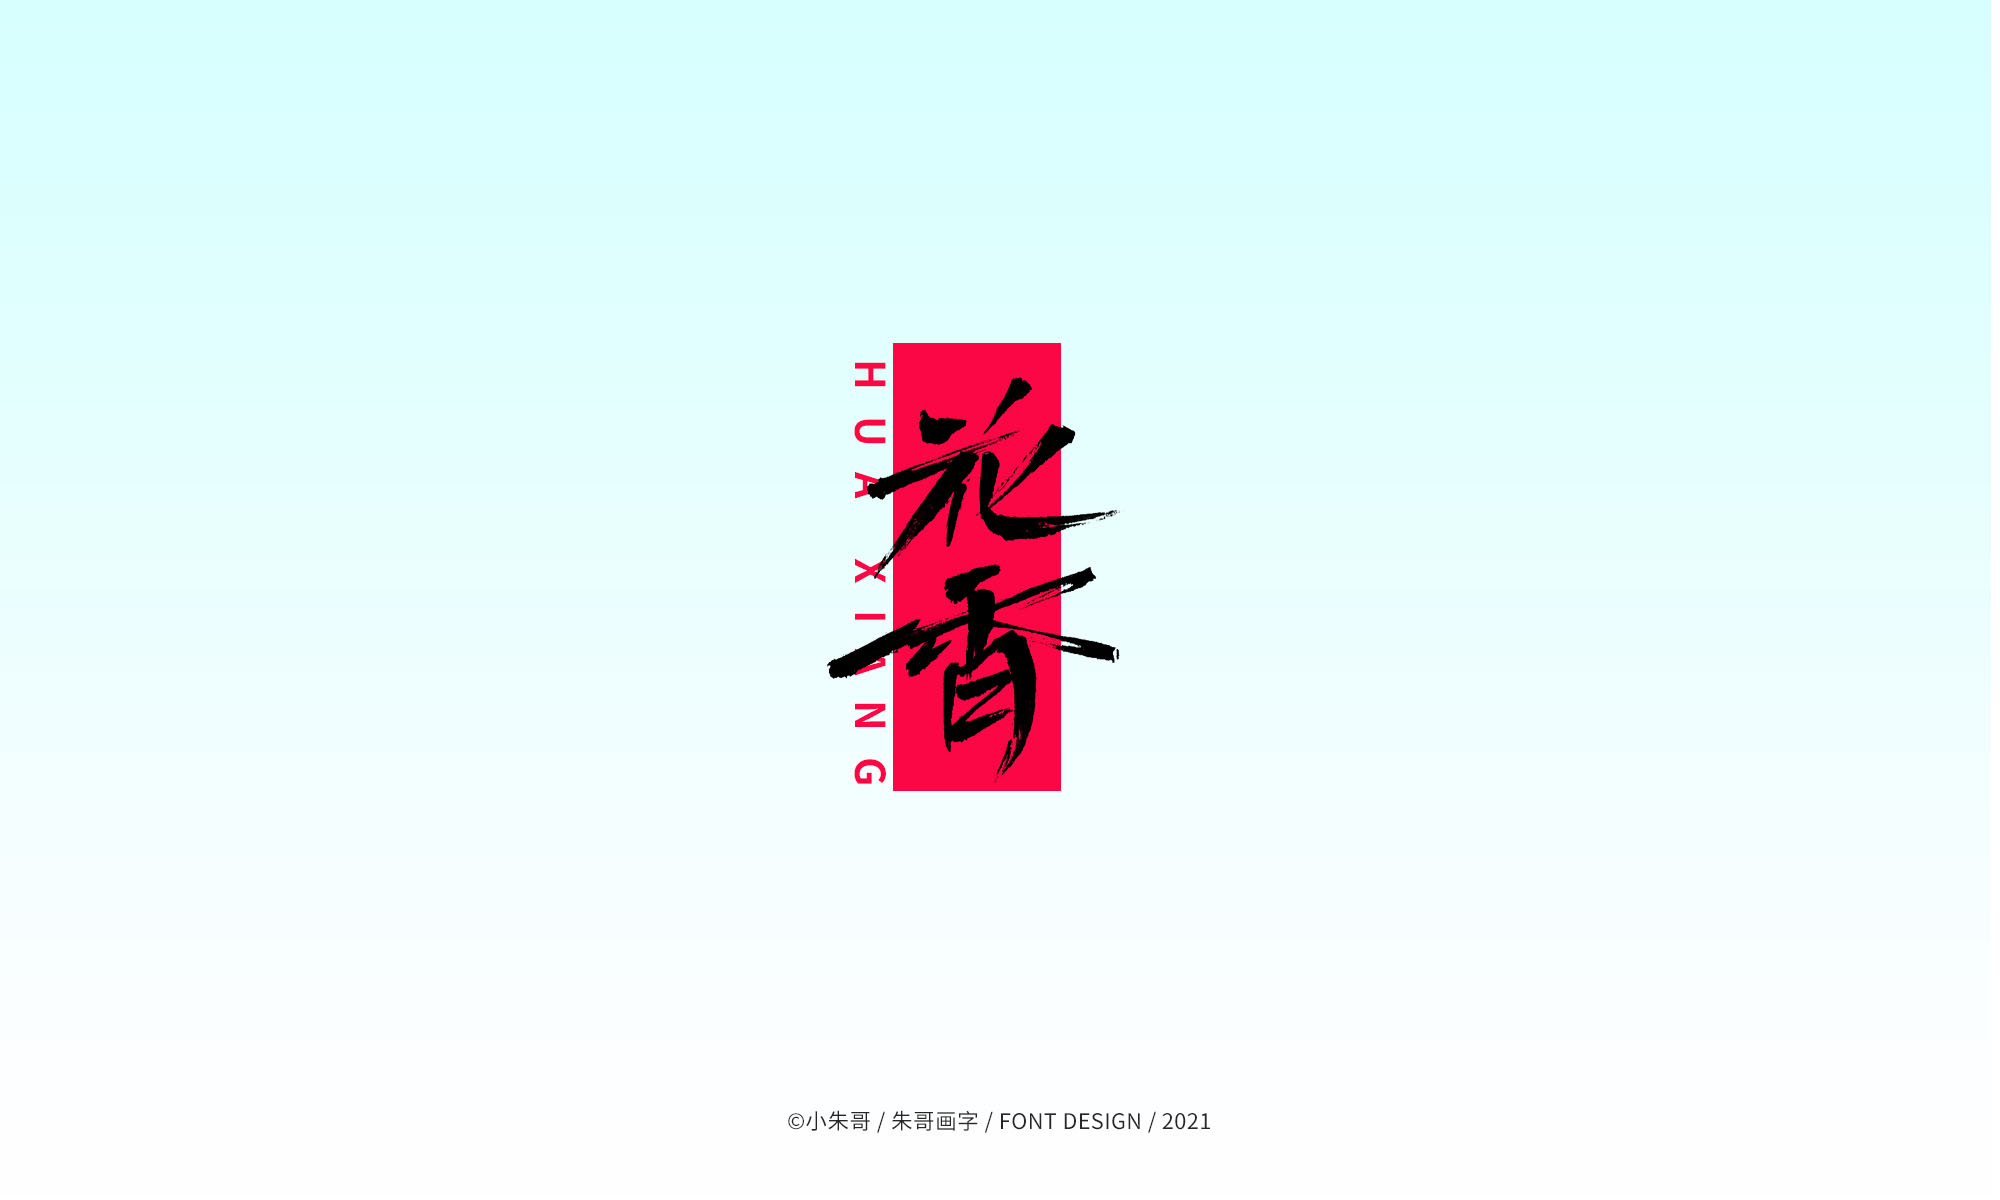 21P Collection of the latest Chinese font design schemes in 2021 #.20